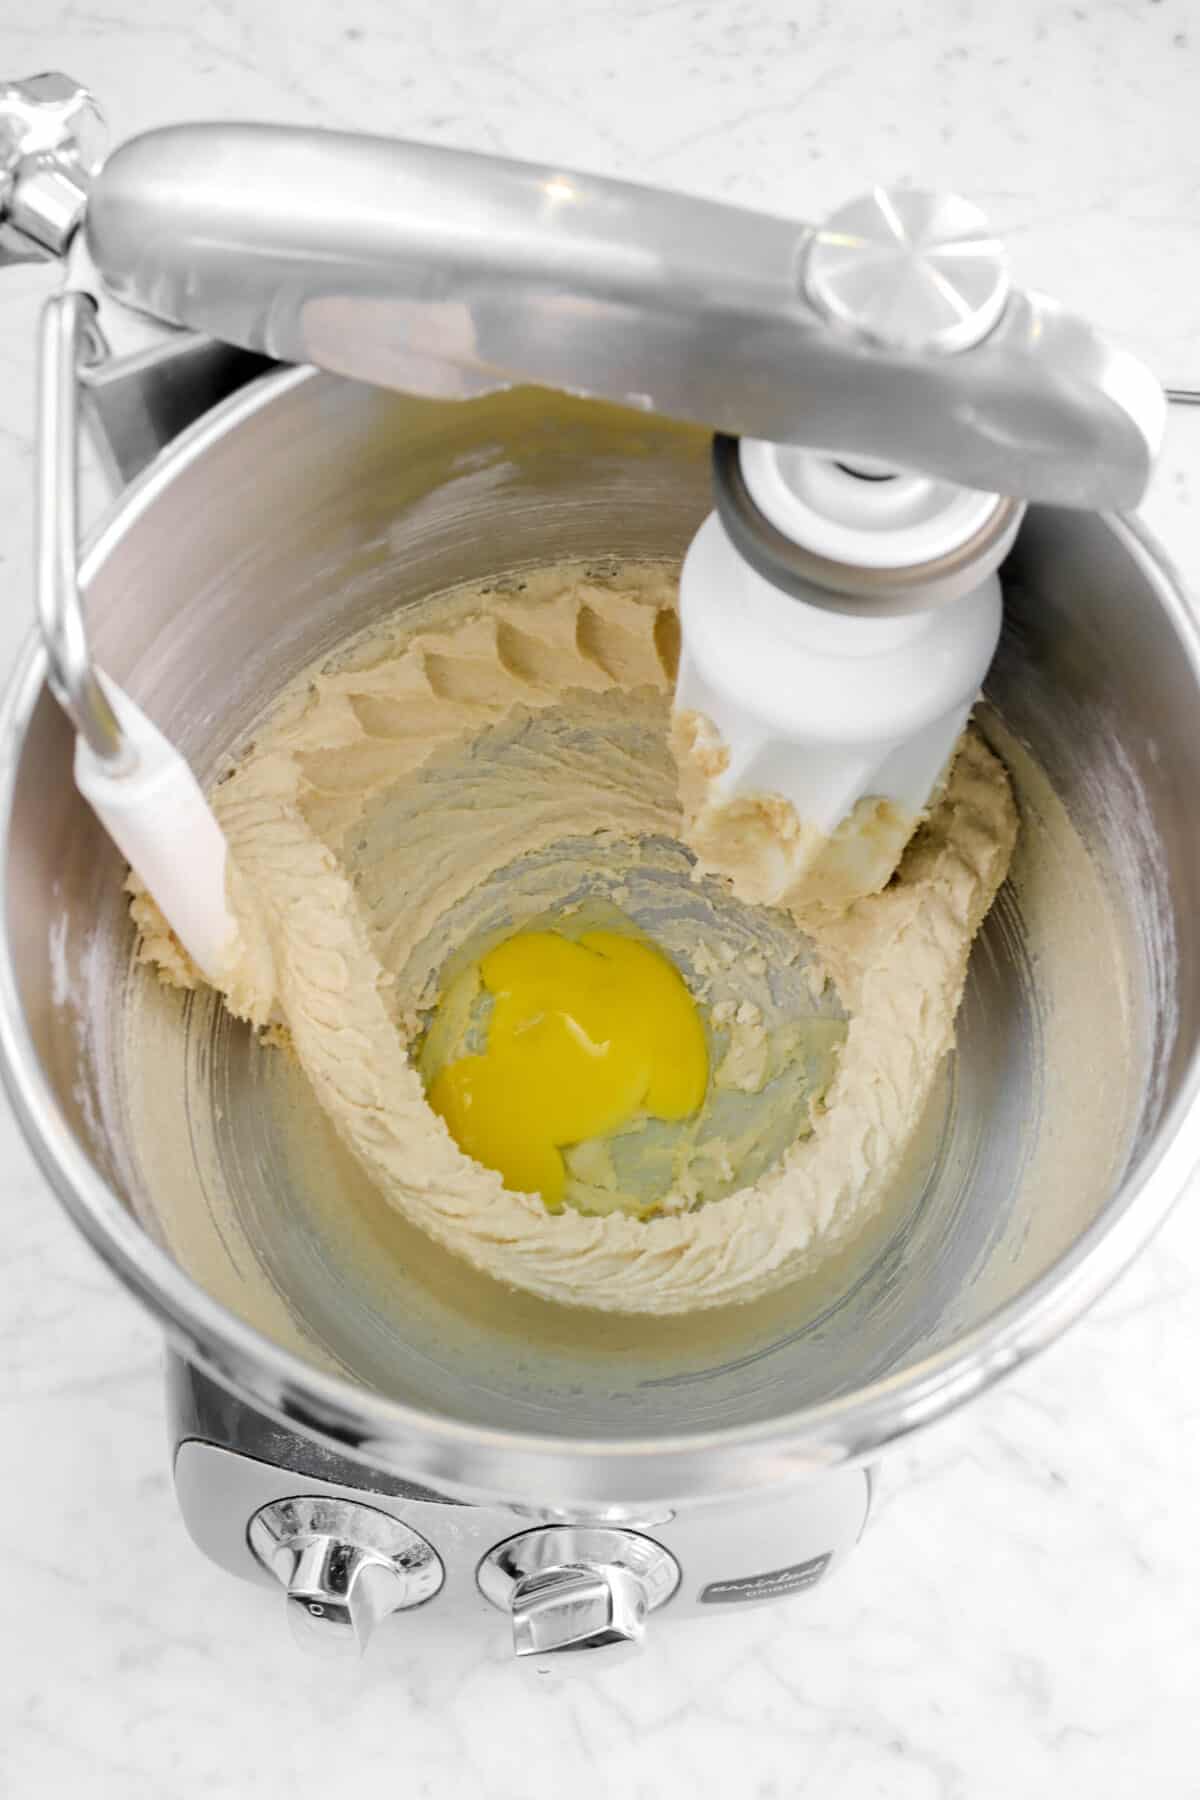 egg added to butter and sugar mixture